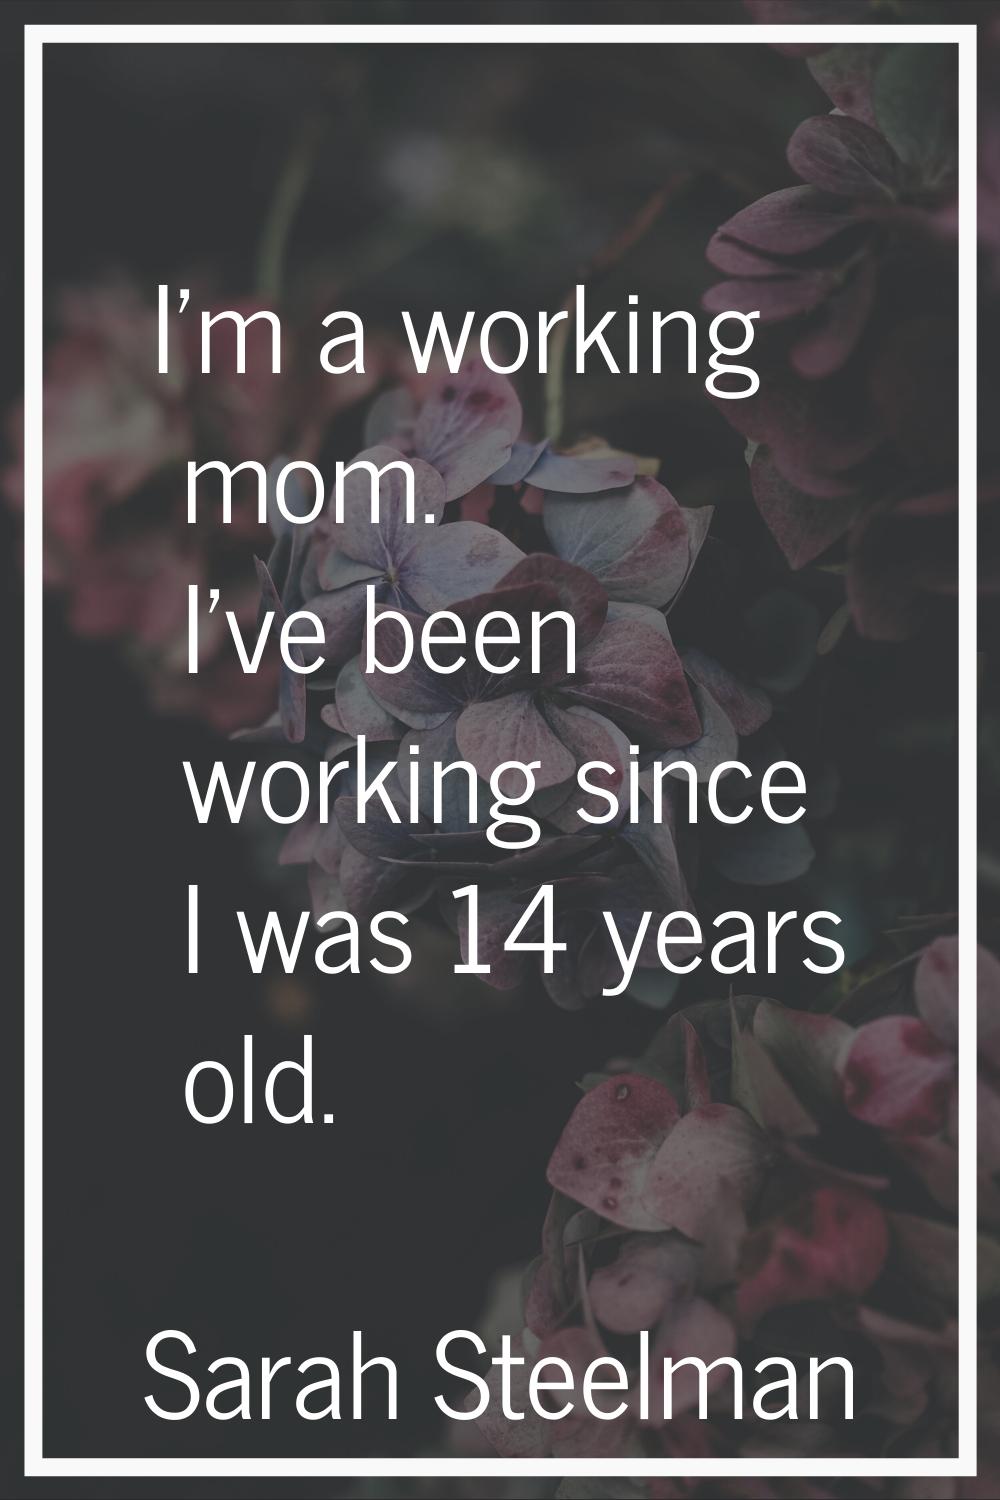 I'm a working mom. I've been working since I was 14 years old.